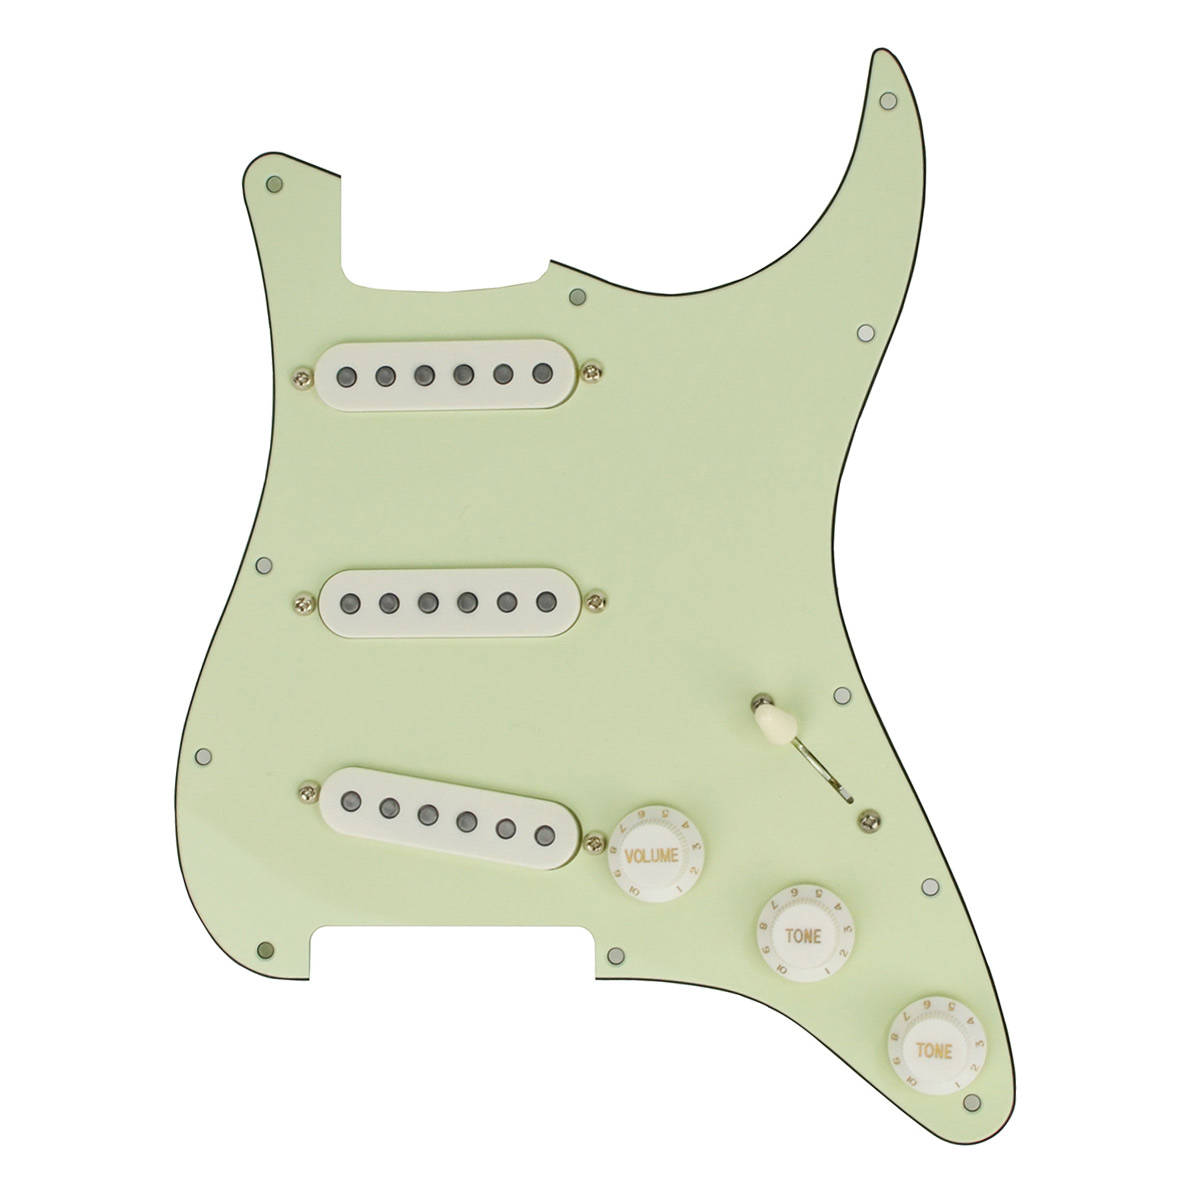 Exceart Loaded Prewired Humbucker Pickguard Pickups Set Leopard Printed 3 Ply SSH Single Coil for ST Strat Electric Guitar Parts Accessories 